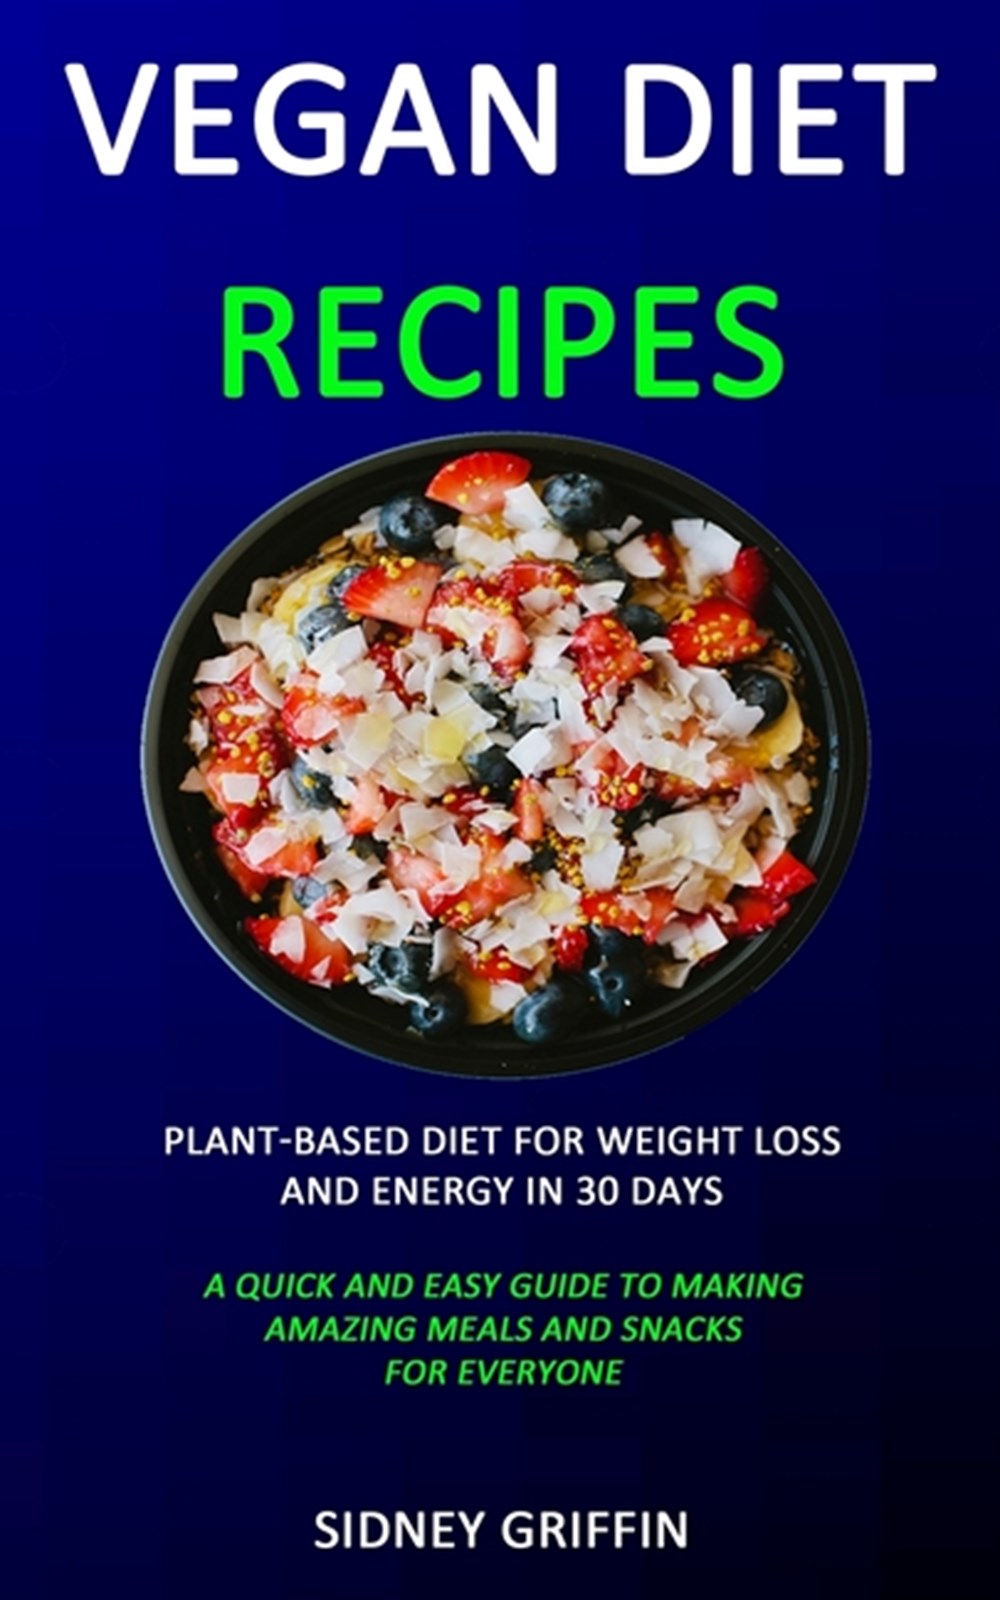 Vegan Diet Recipes in Paperback by Sidney Griffin